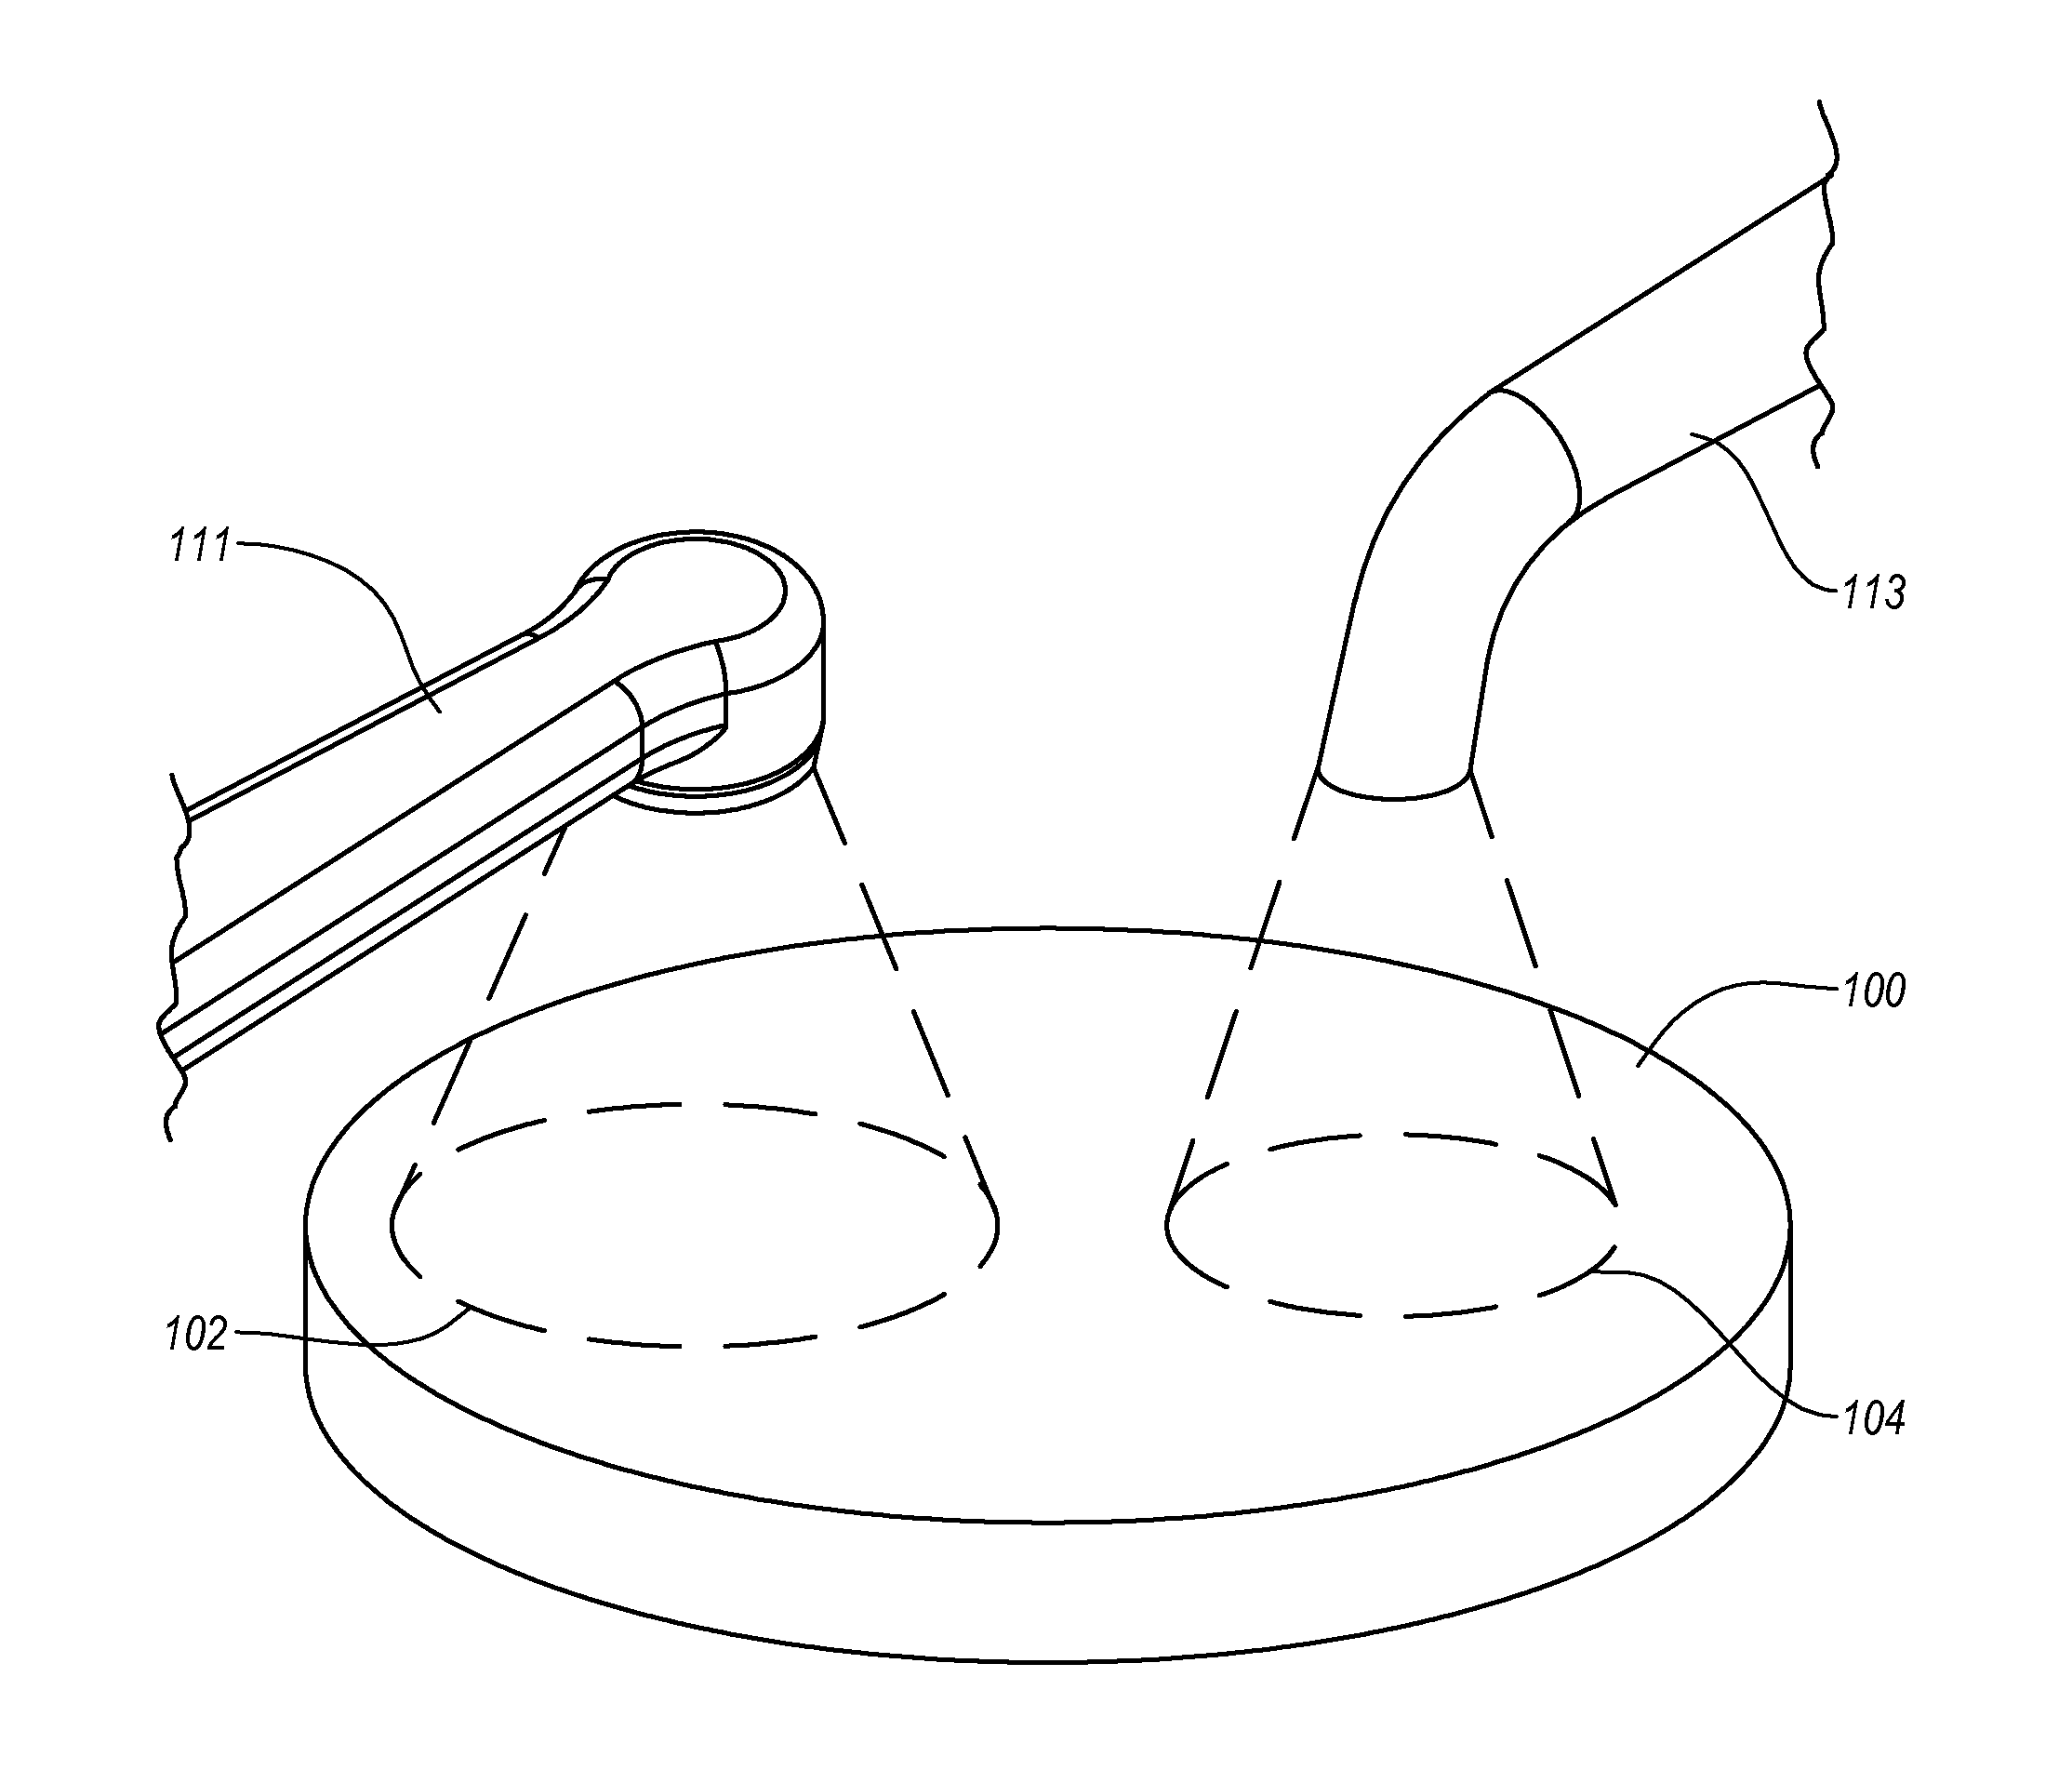 Method for evaluating performance characteristics of dental curing lights